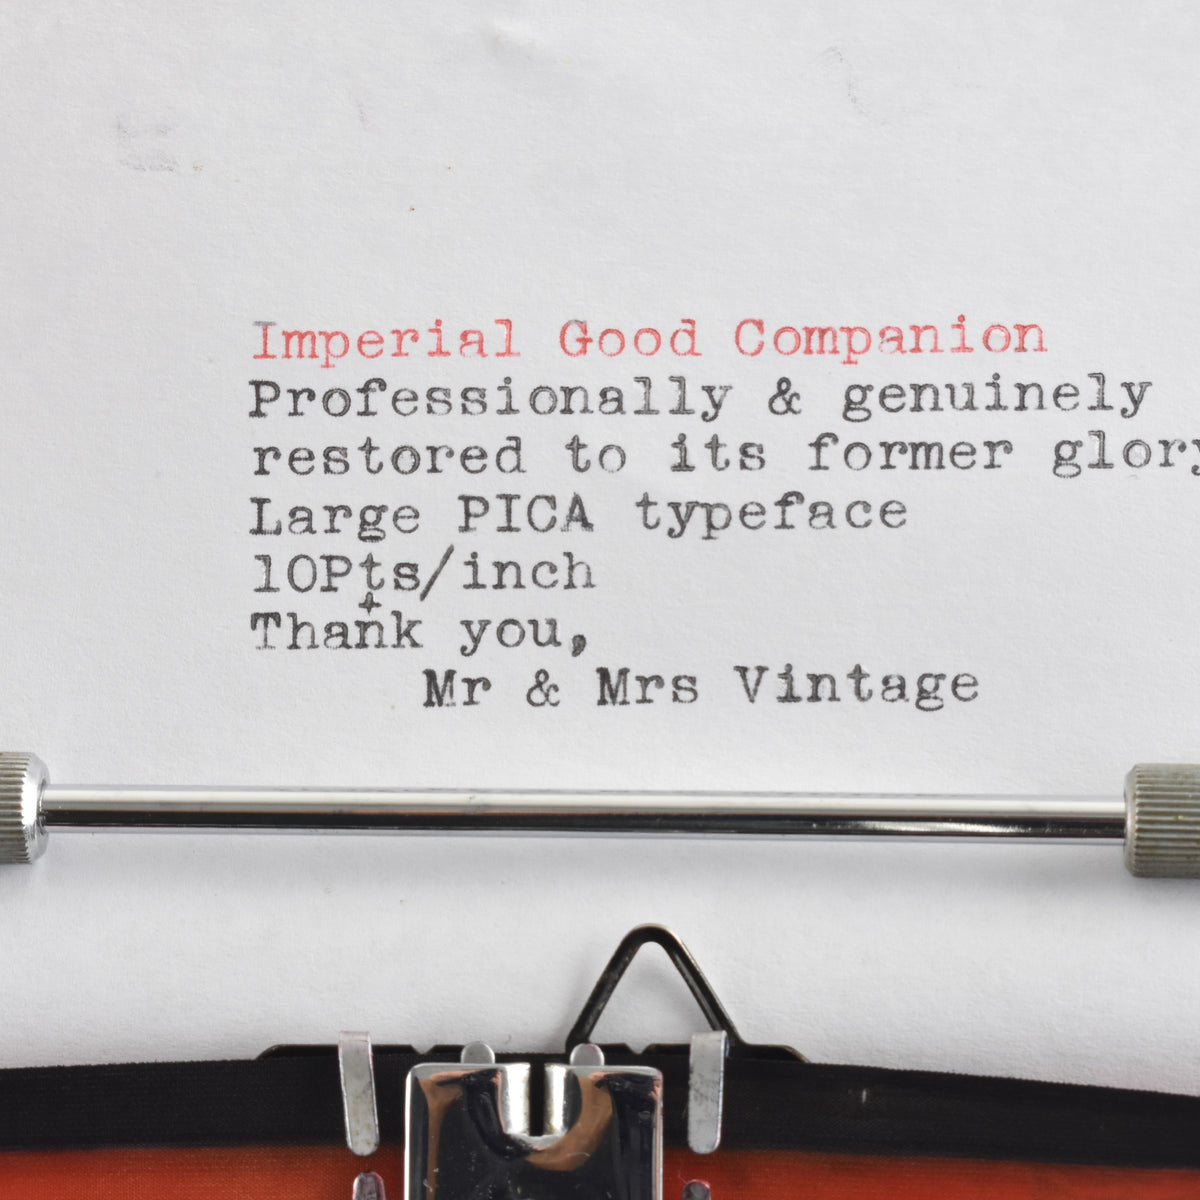 imperial good companion serial number